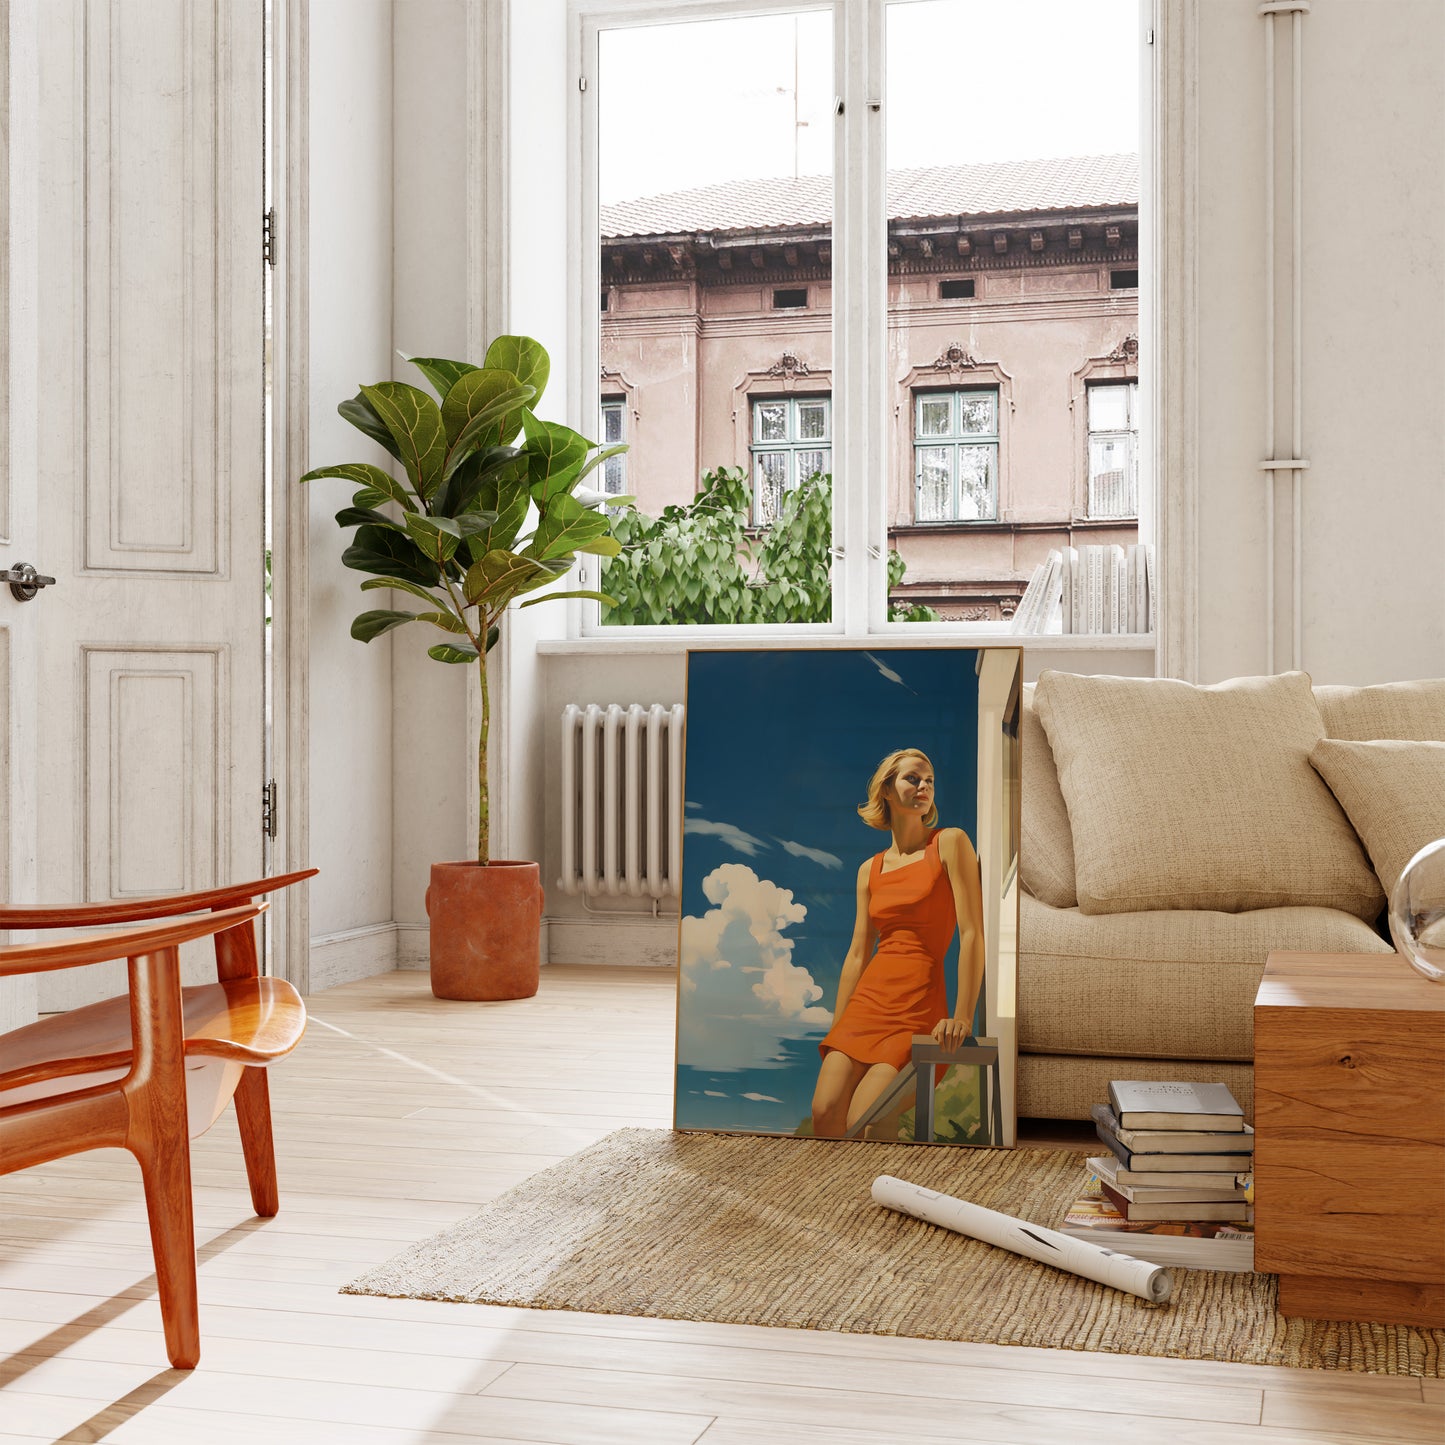 A stylish living room with a large framed photo of a woman leaning against the wall.